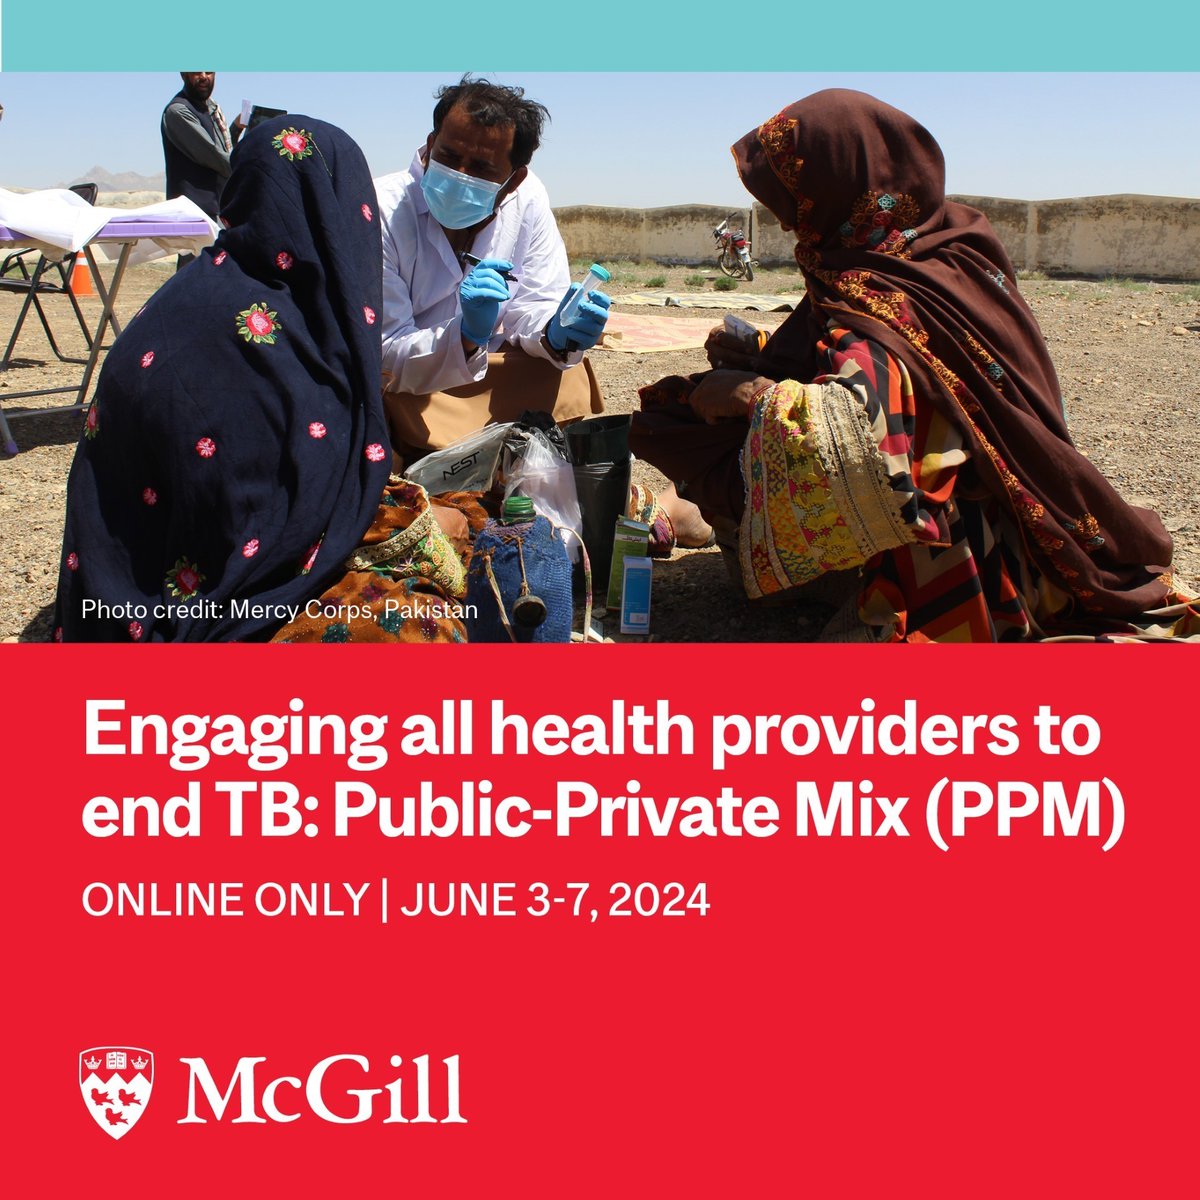 Join week-long TB-PPM course for deep dives into engaging private providers, policy & financing, partnerships, implementation, quality care & more.
.
Fee Waiver for #TBSurvivors who are interested in learning more about Public Private Mix in TB Management. @SATB1231